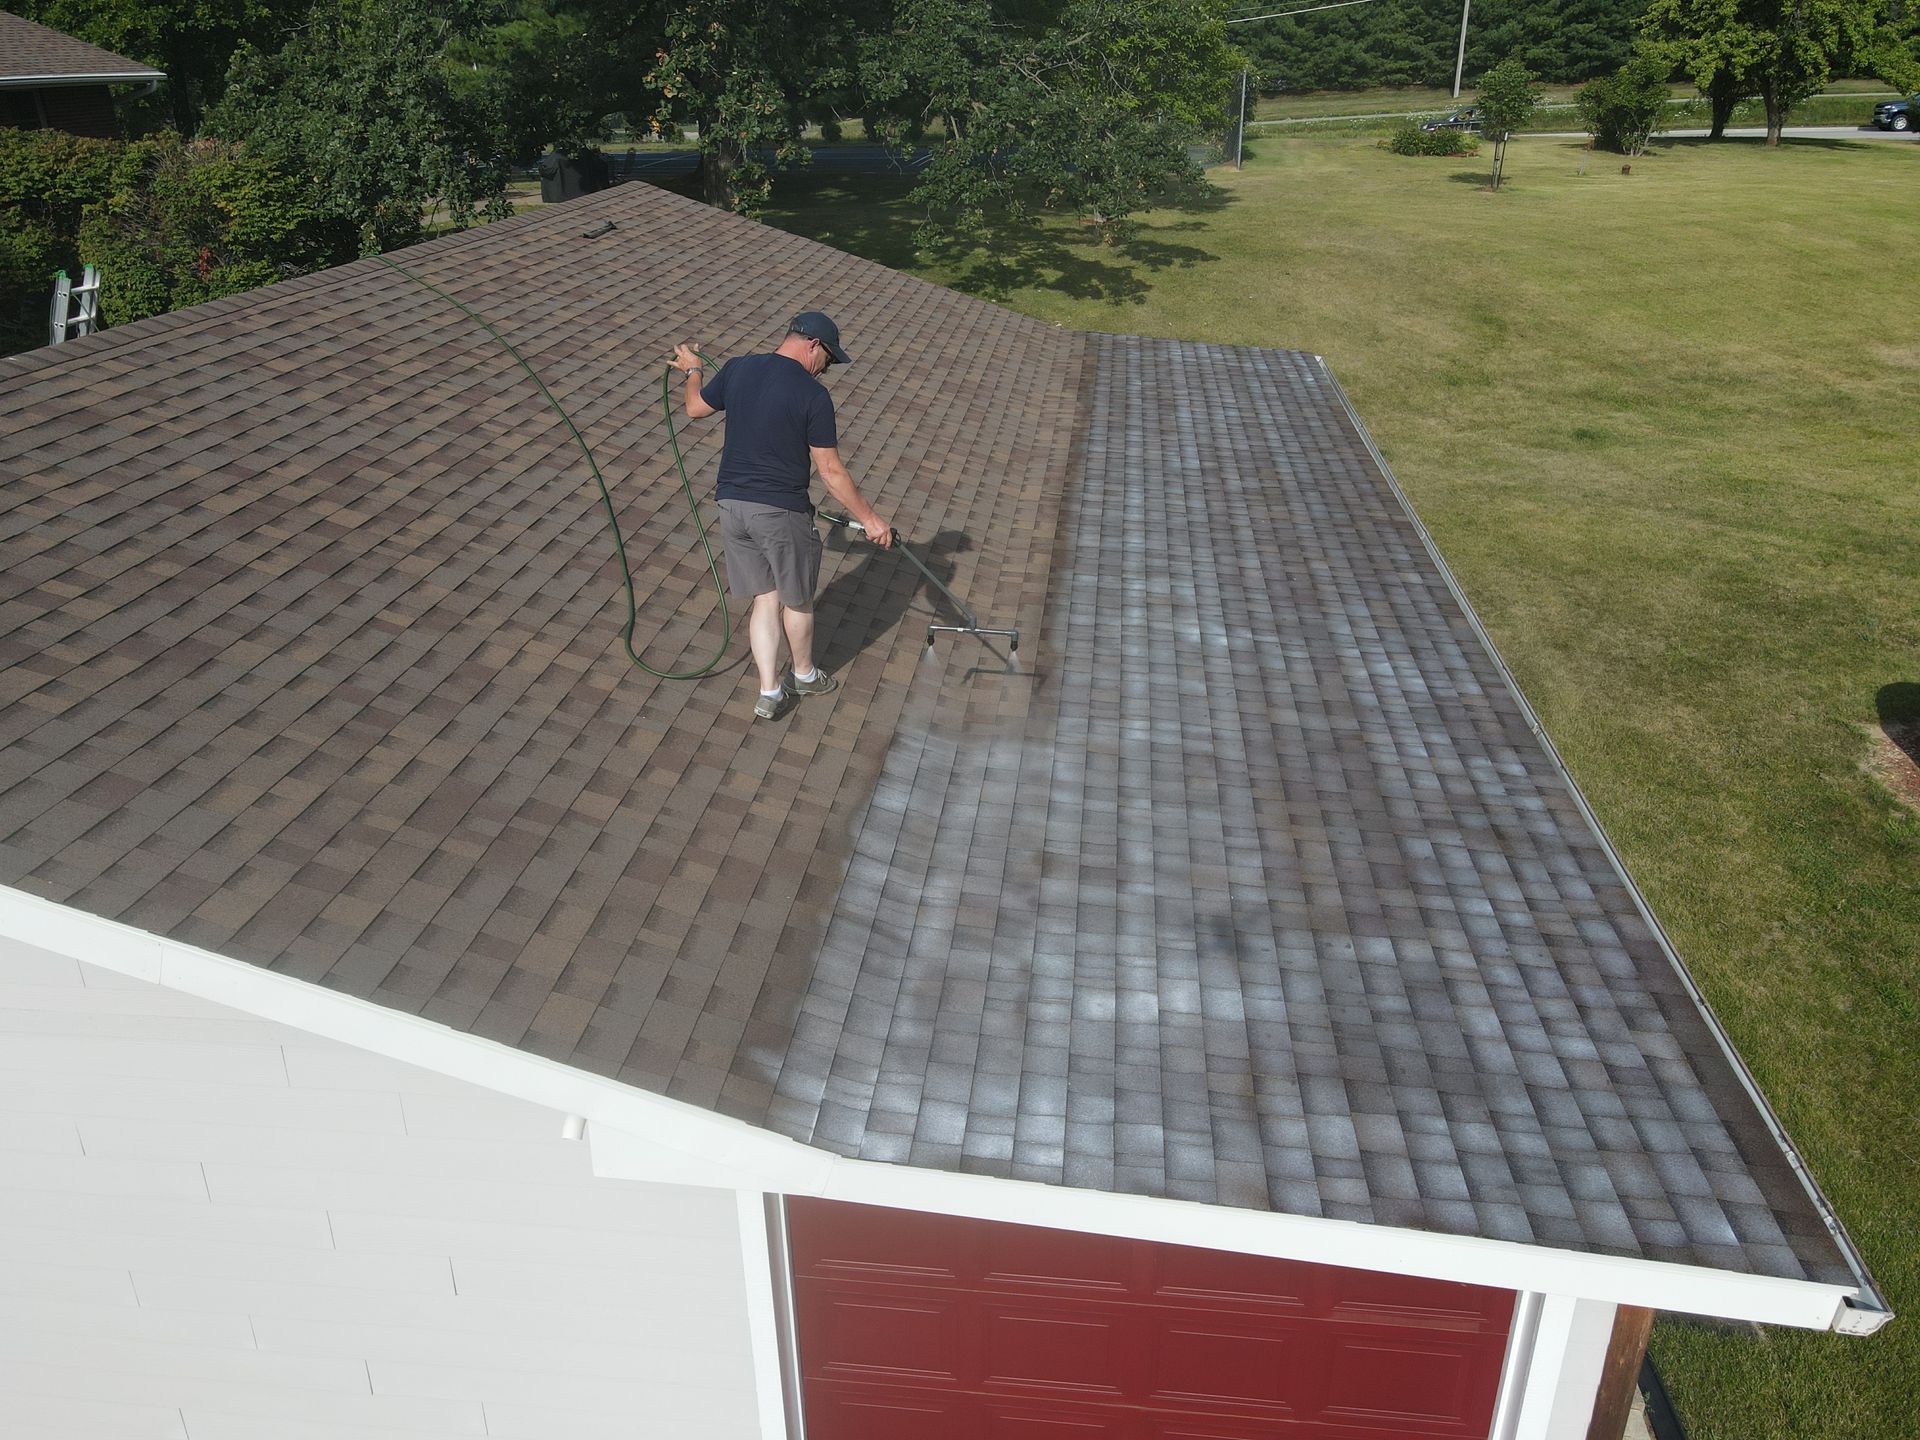 A man spraying roof rejuvenation spray on the roof of a house.